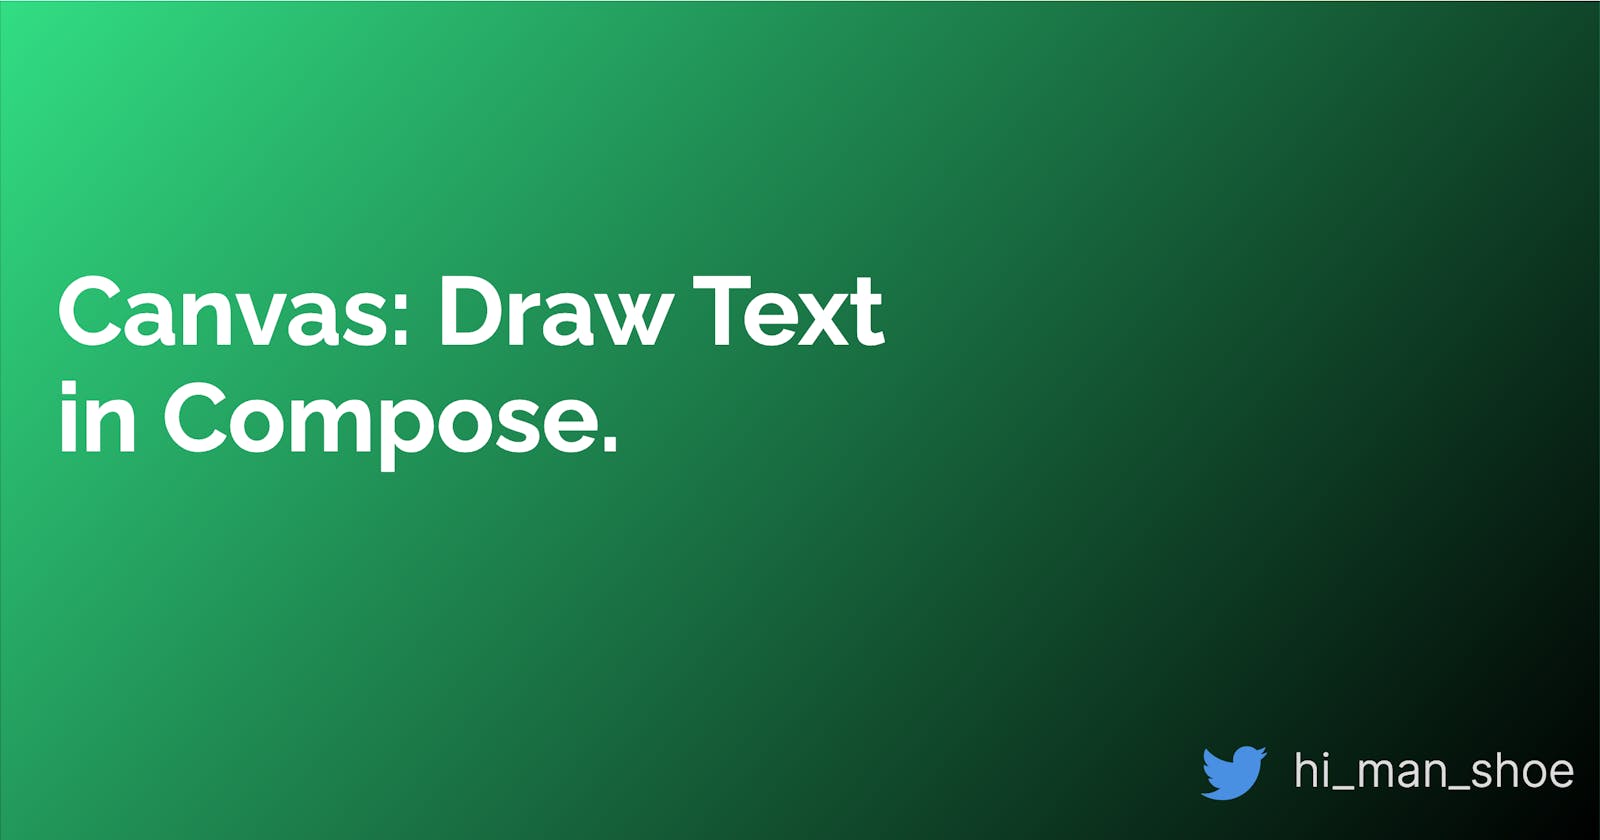 Canvas: How to draw text in Jetpack Compose?